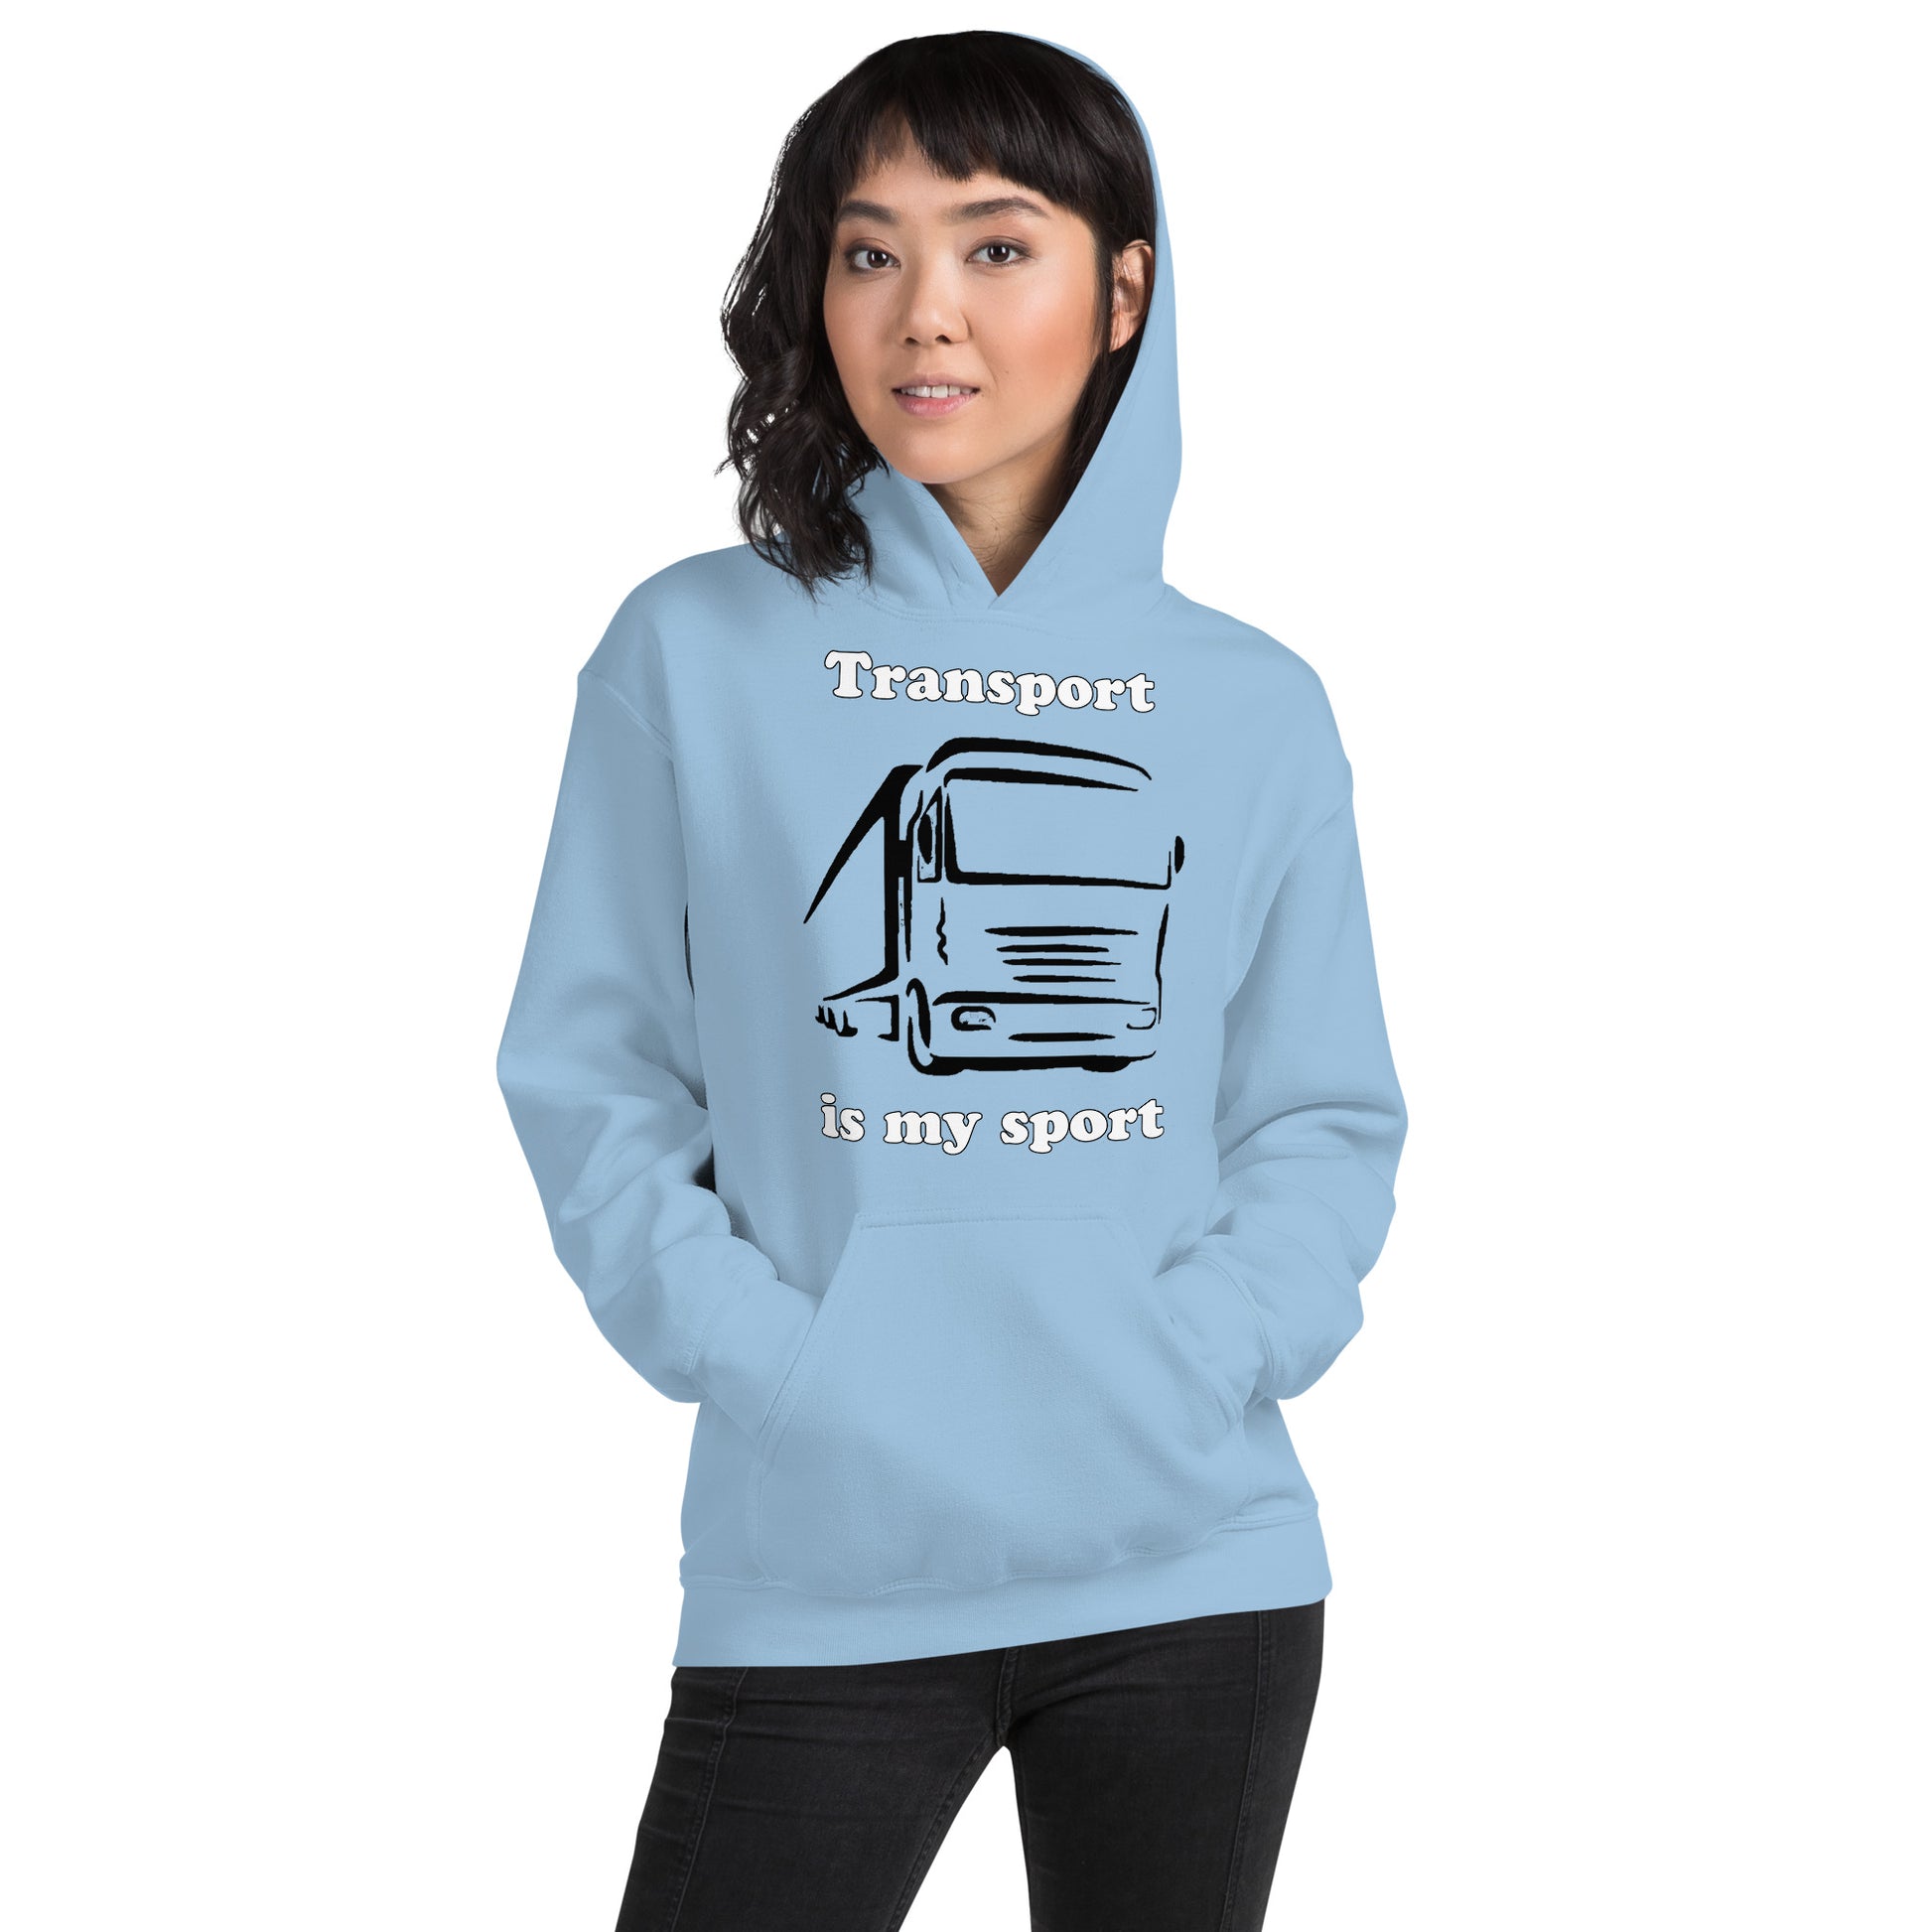 Woman with sky blue hoodie with picture of truck and text "Transport is my sport"